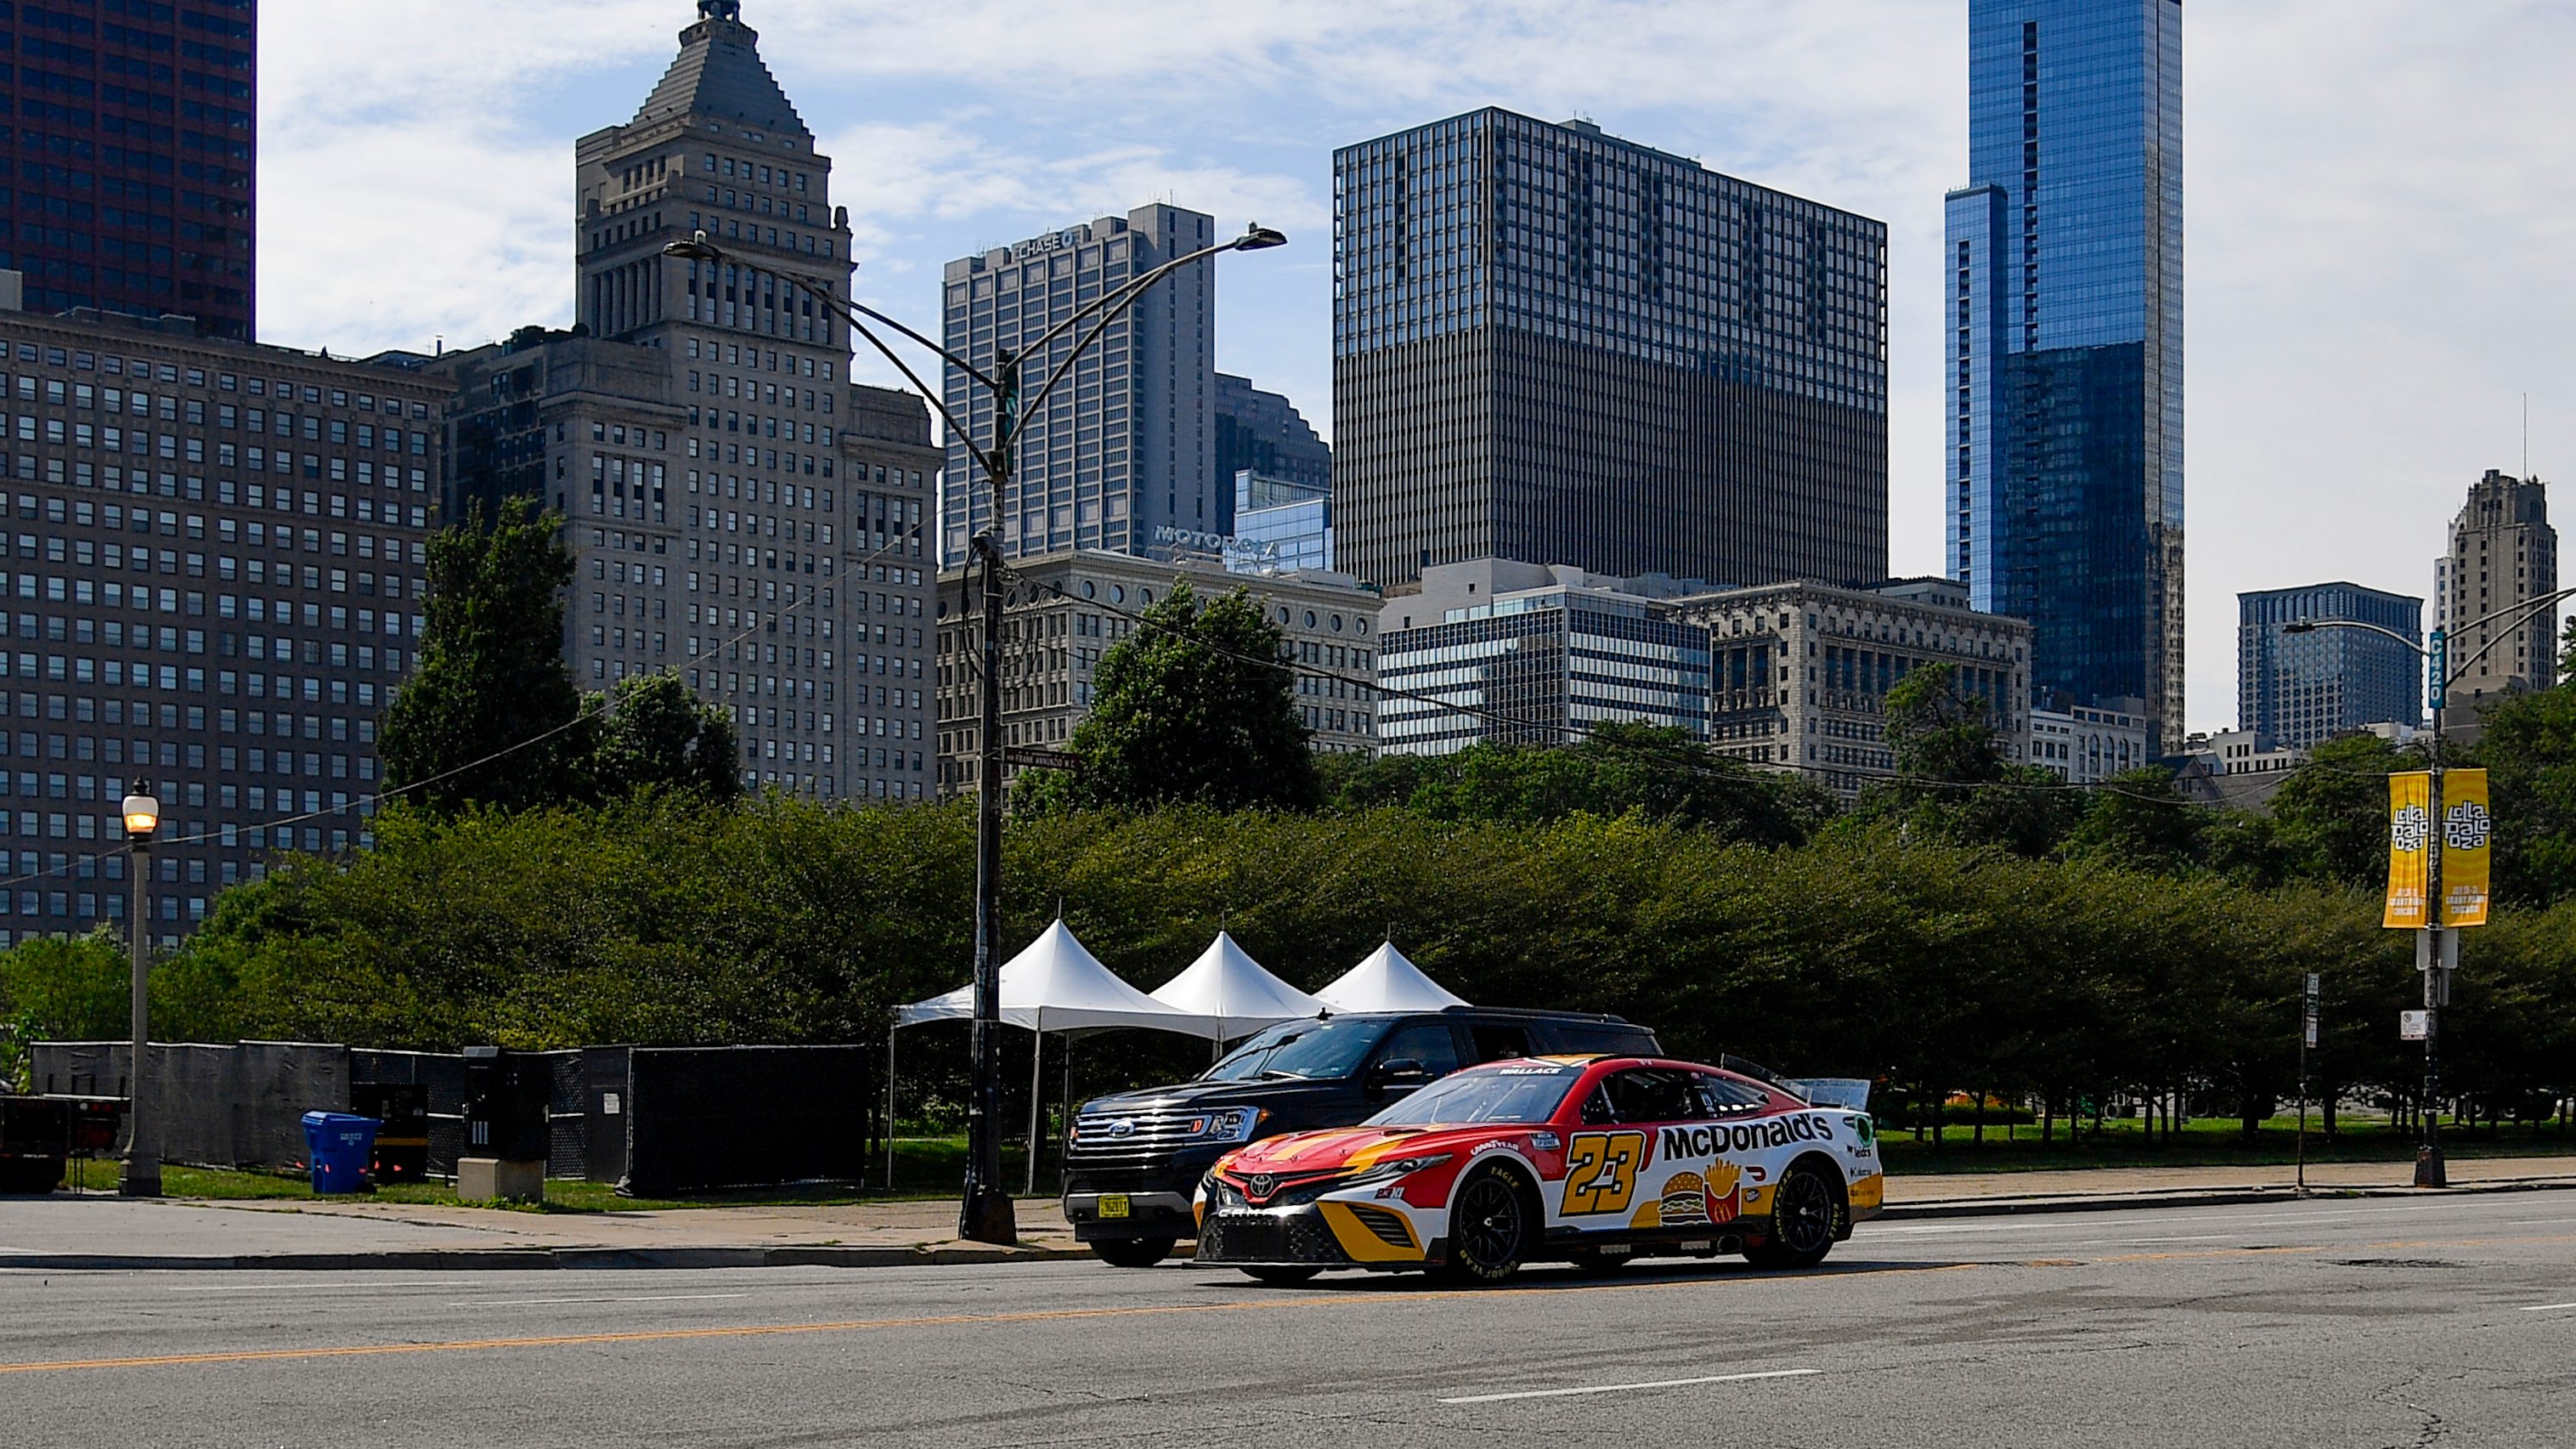 2023 NASCAR Chicago Street Race how to watch, start time, TV info